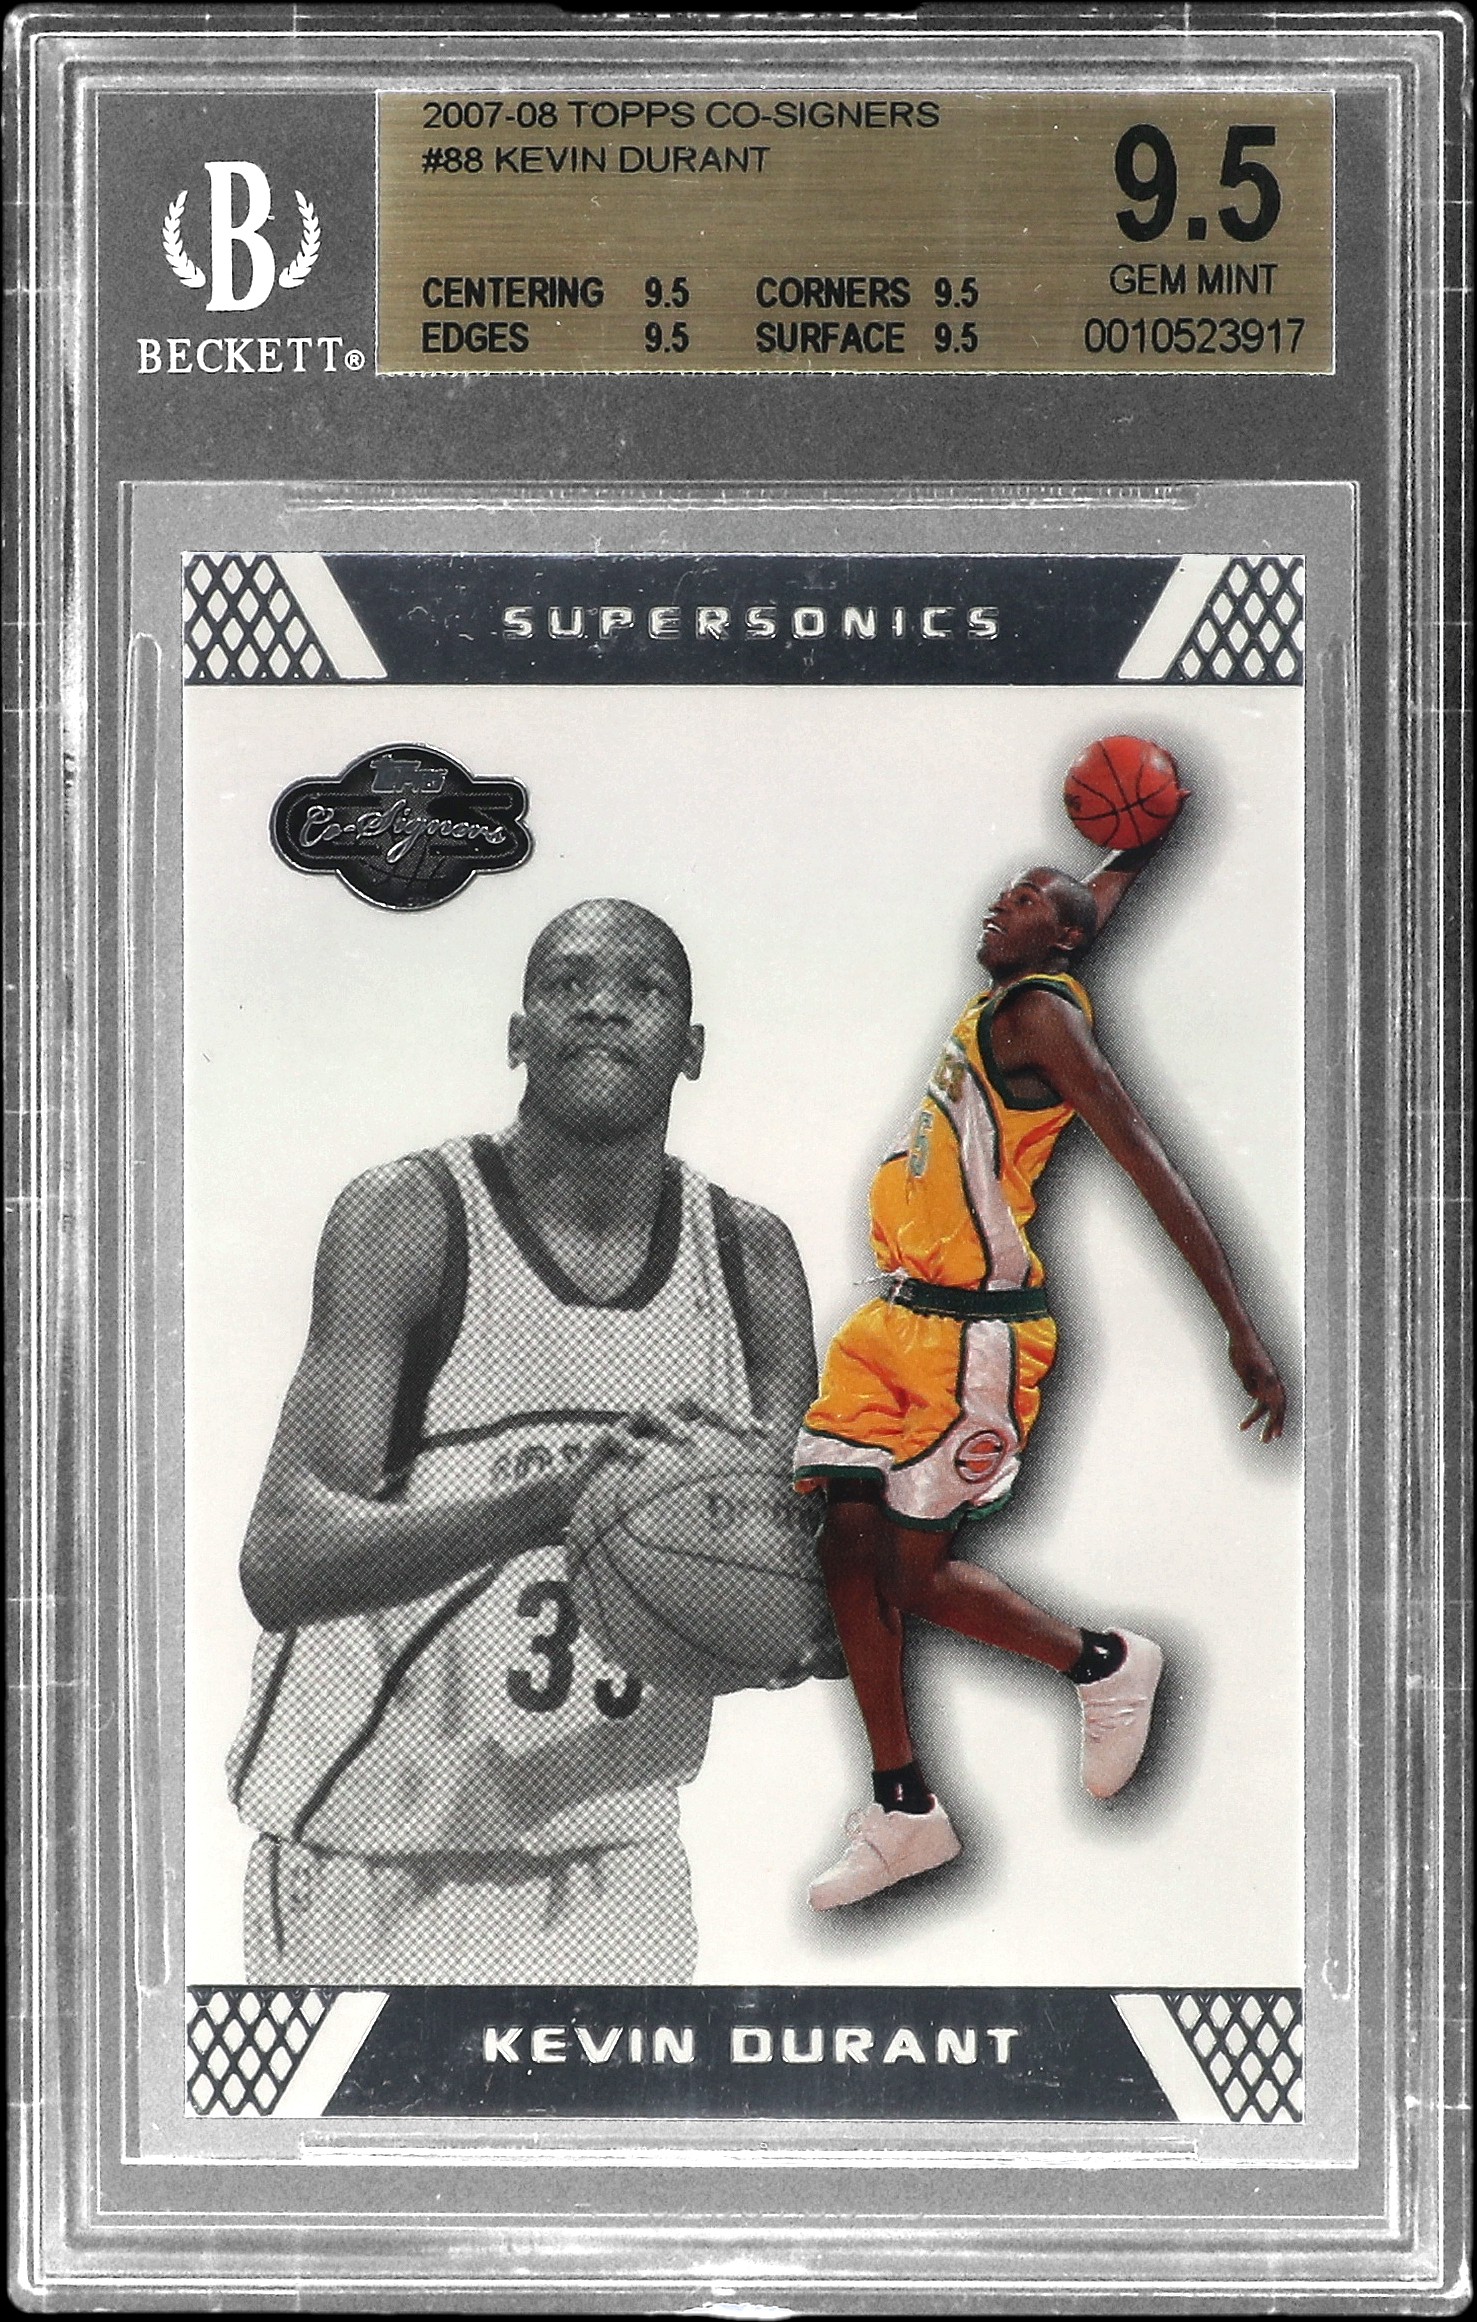 2007 Topps Co-Signers #88 Kevin Durant Rookie Card (#468/499) – BGS GEM MINT 9.5